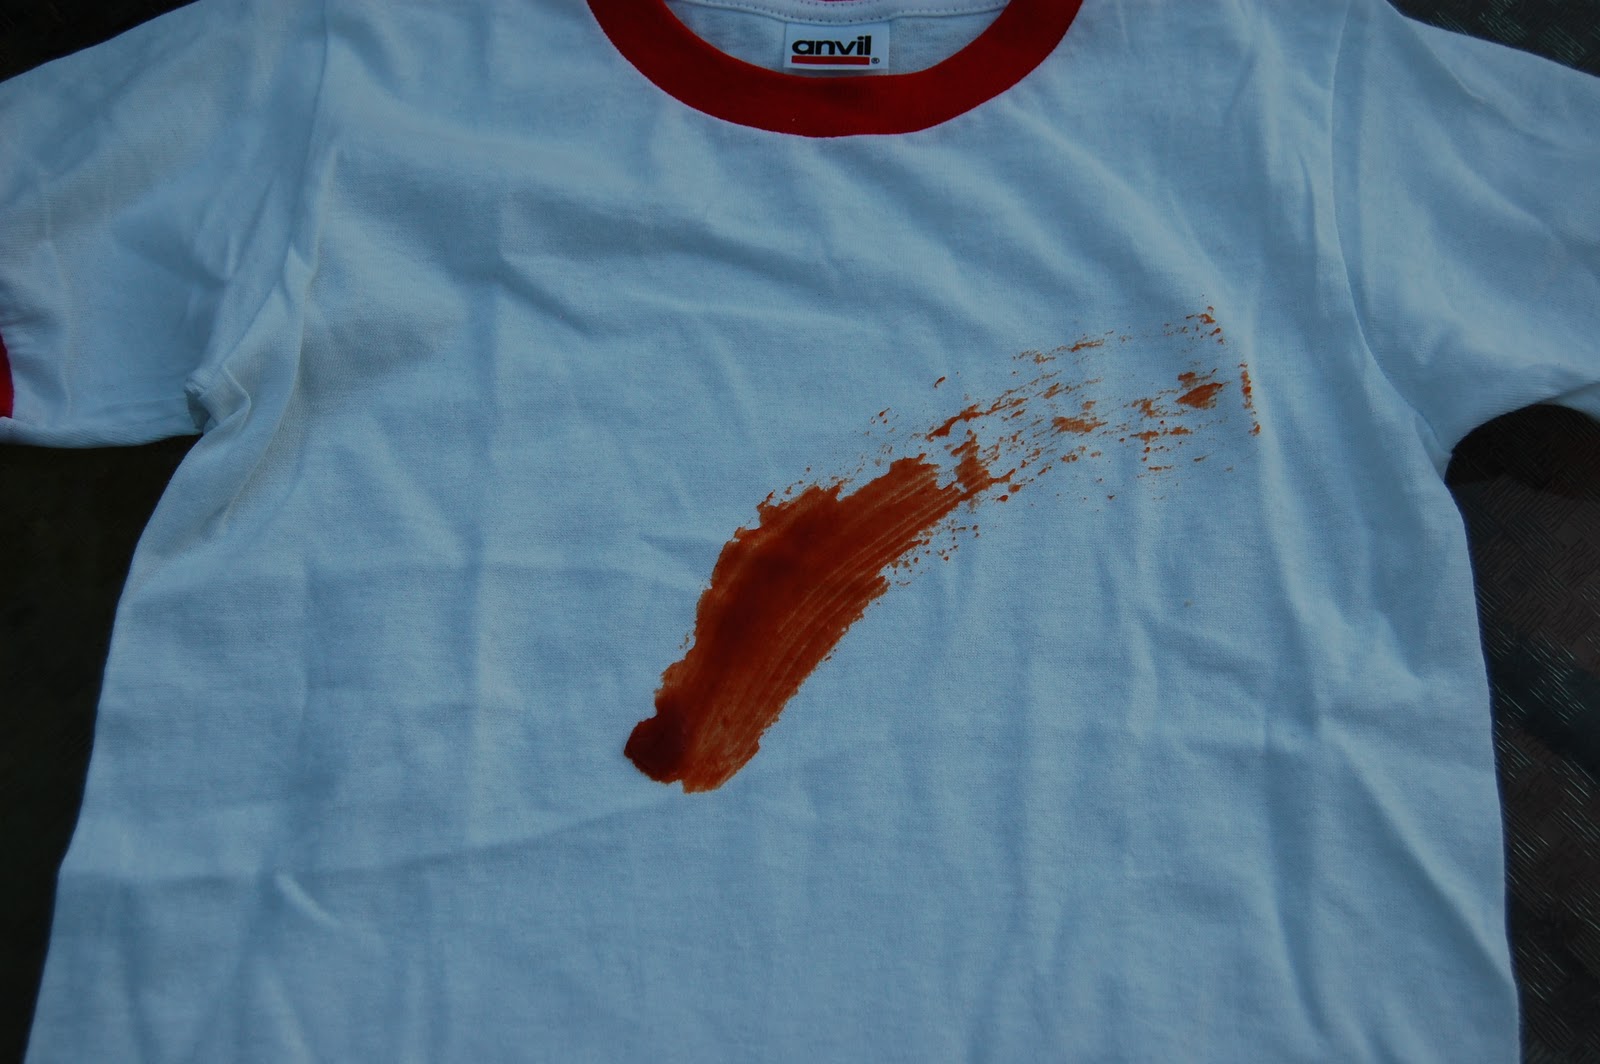 ketchup shirt stain problem